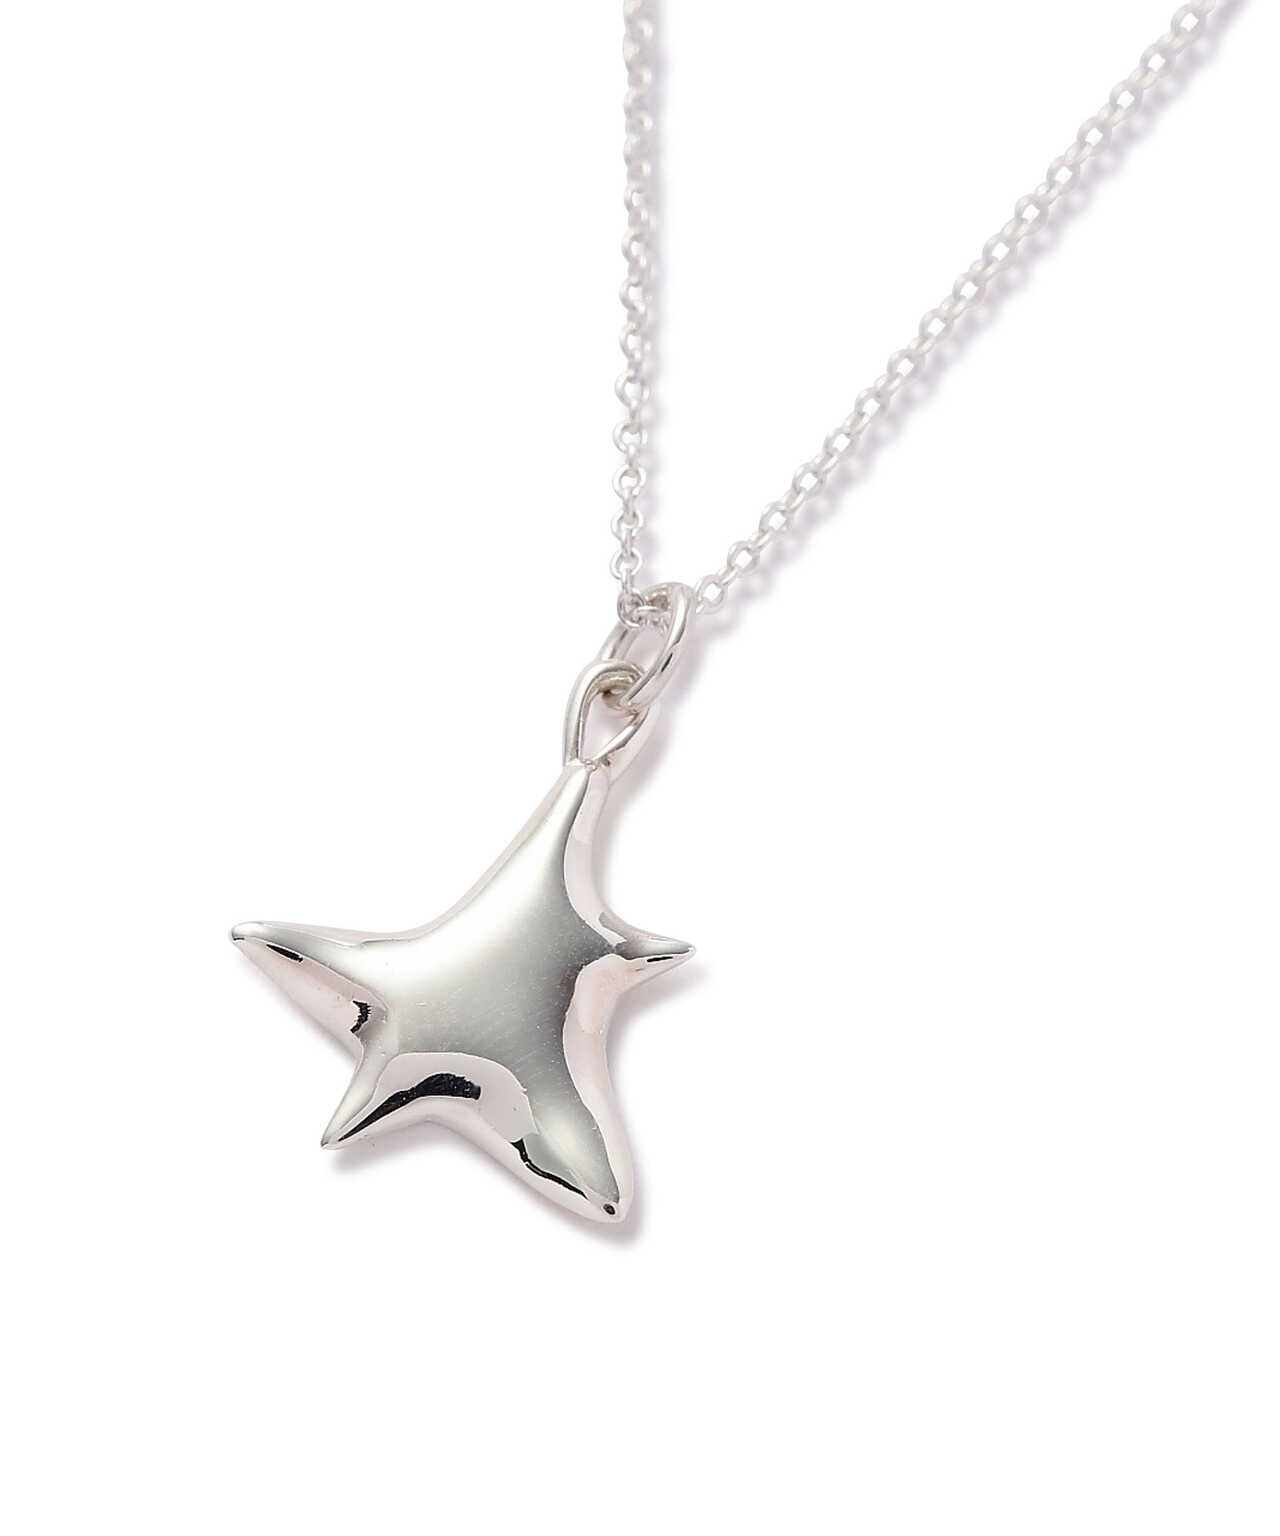 BAR JEWELLERY(バージュエリー) ABSTRACT STAR NECKLACE  SILVER ネックレス